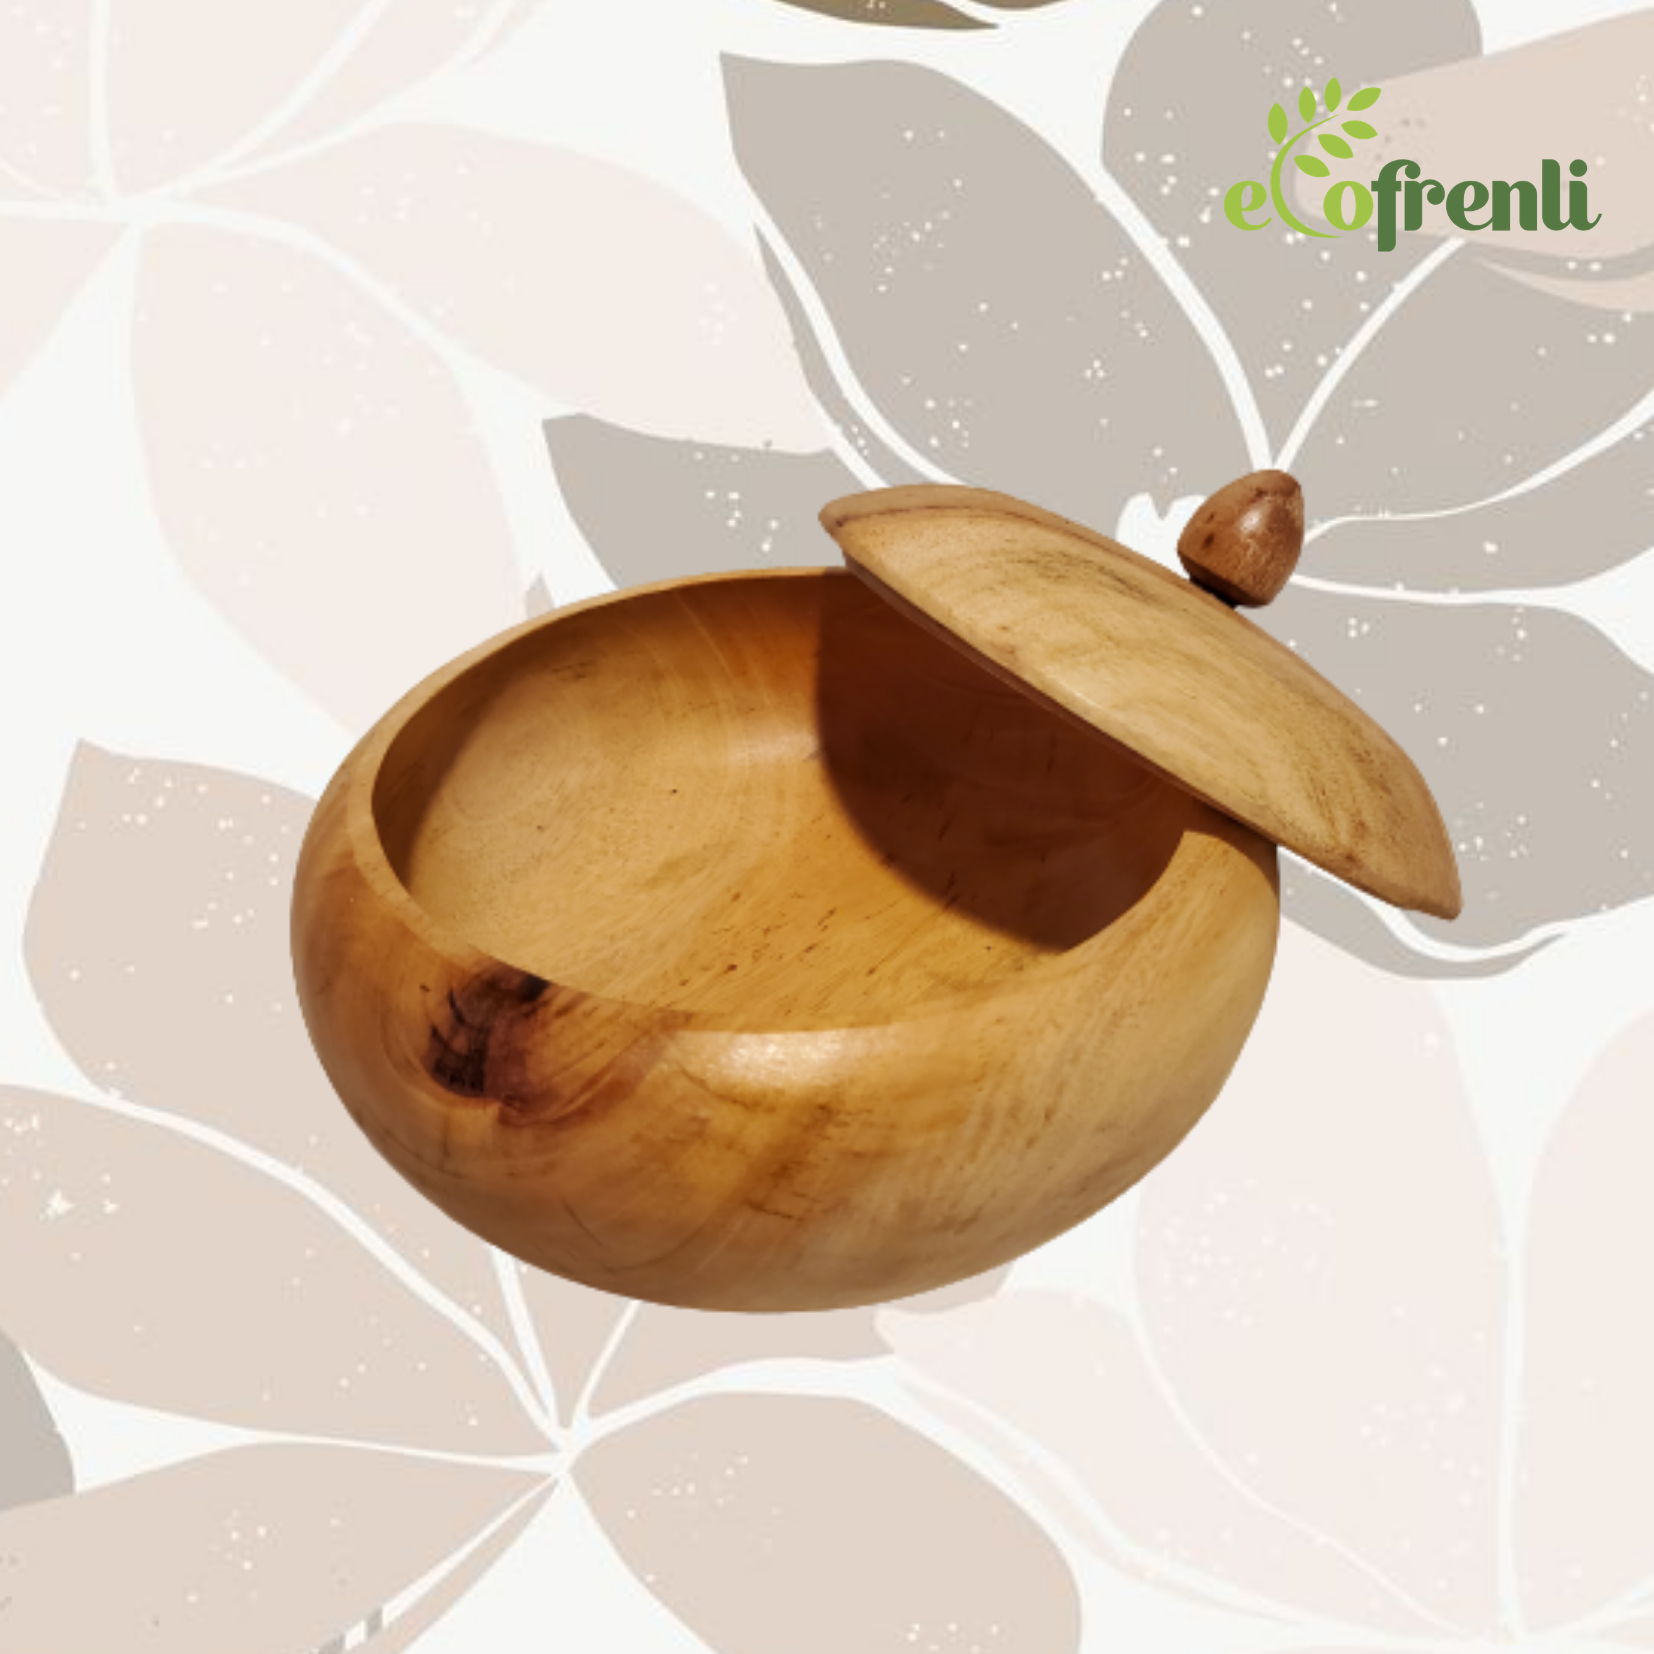 Wooden Serving Bowl With Cover - Ecofrenli.com